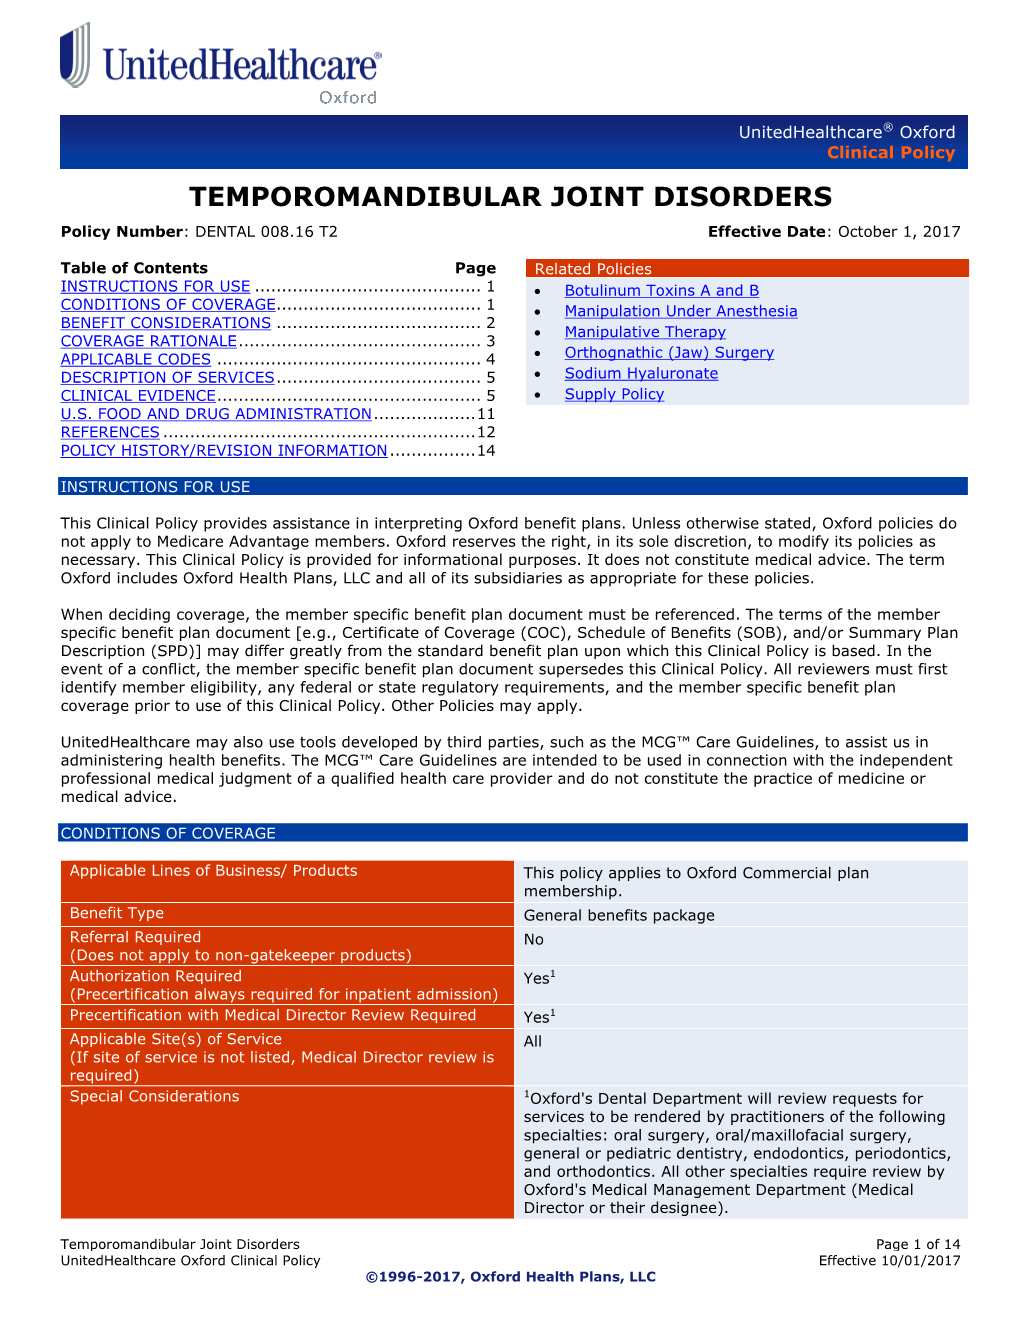 TEMPOROMANDIBULAR JOINT DISORDERS Policy Number: DENTAL 008.16 T2 Effective Date: October 1, 2017